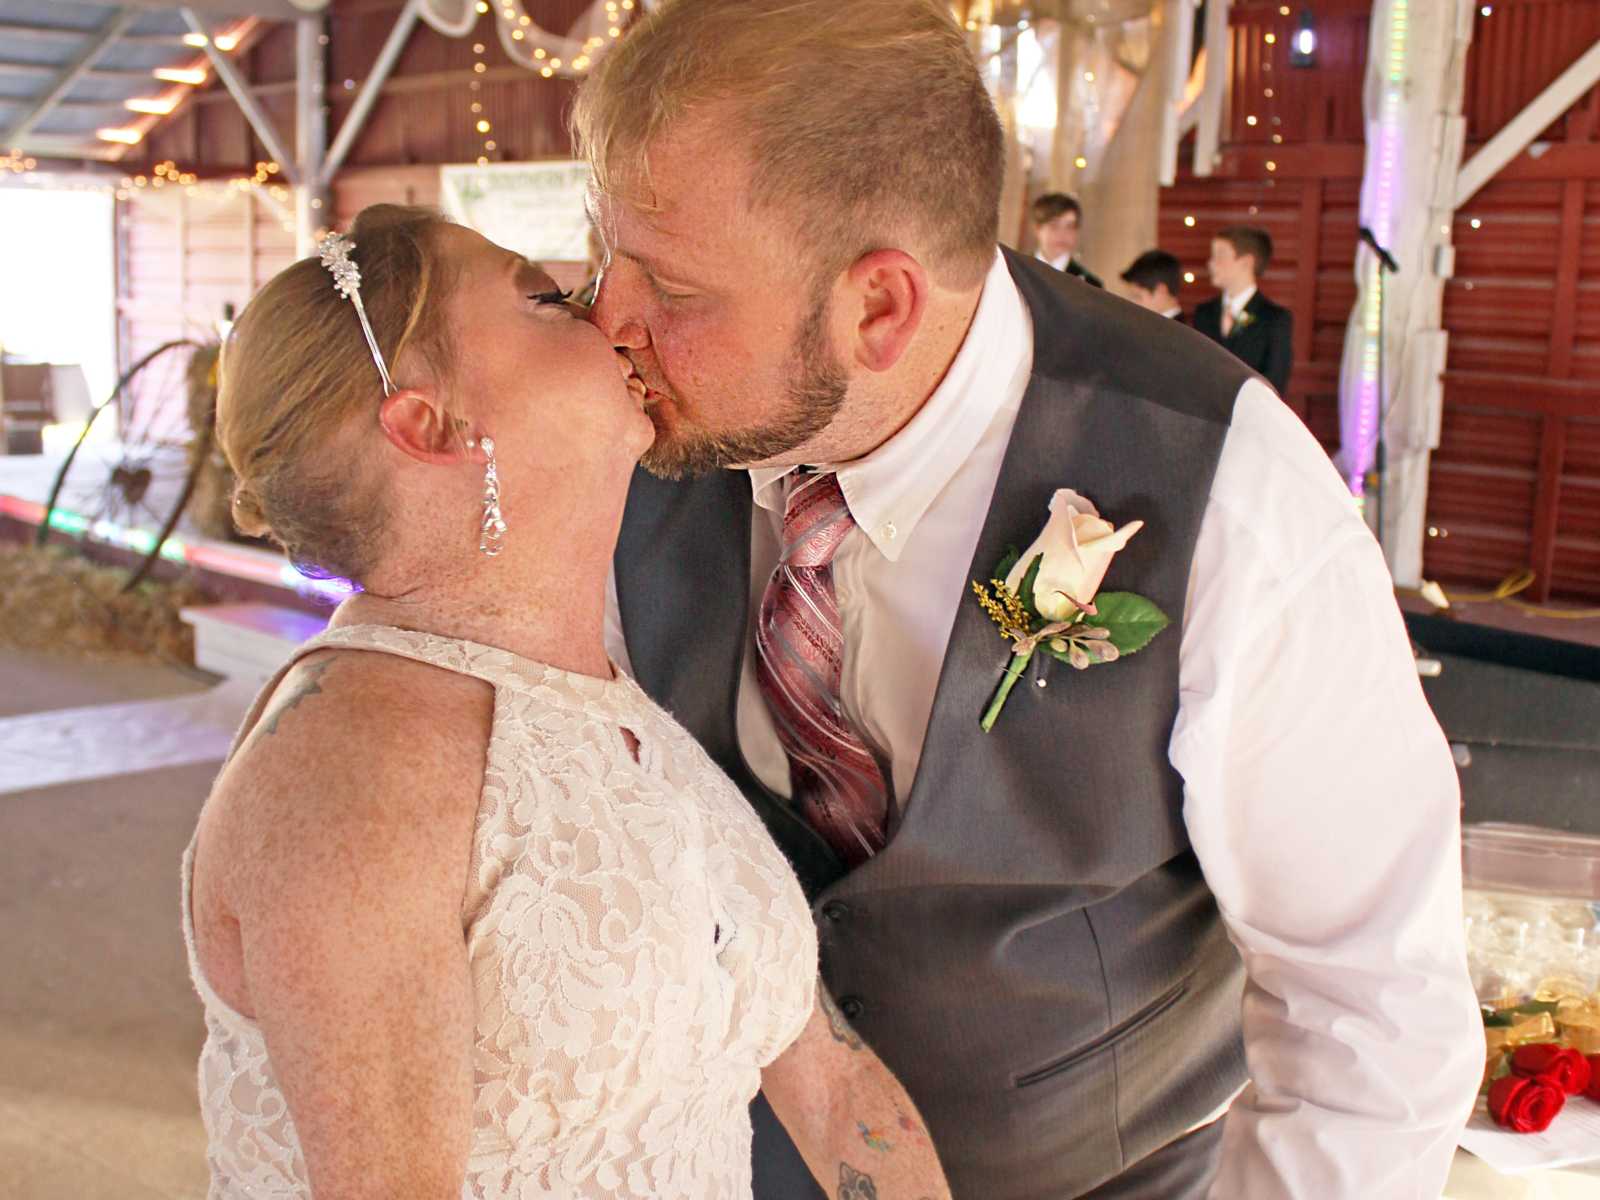 disabled couple share a kiss at barn wedding with young boys in suits in background